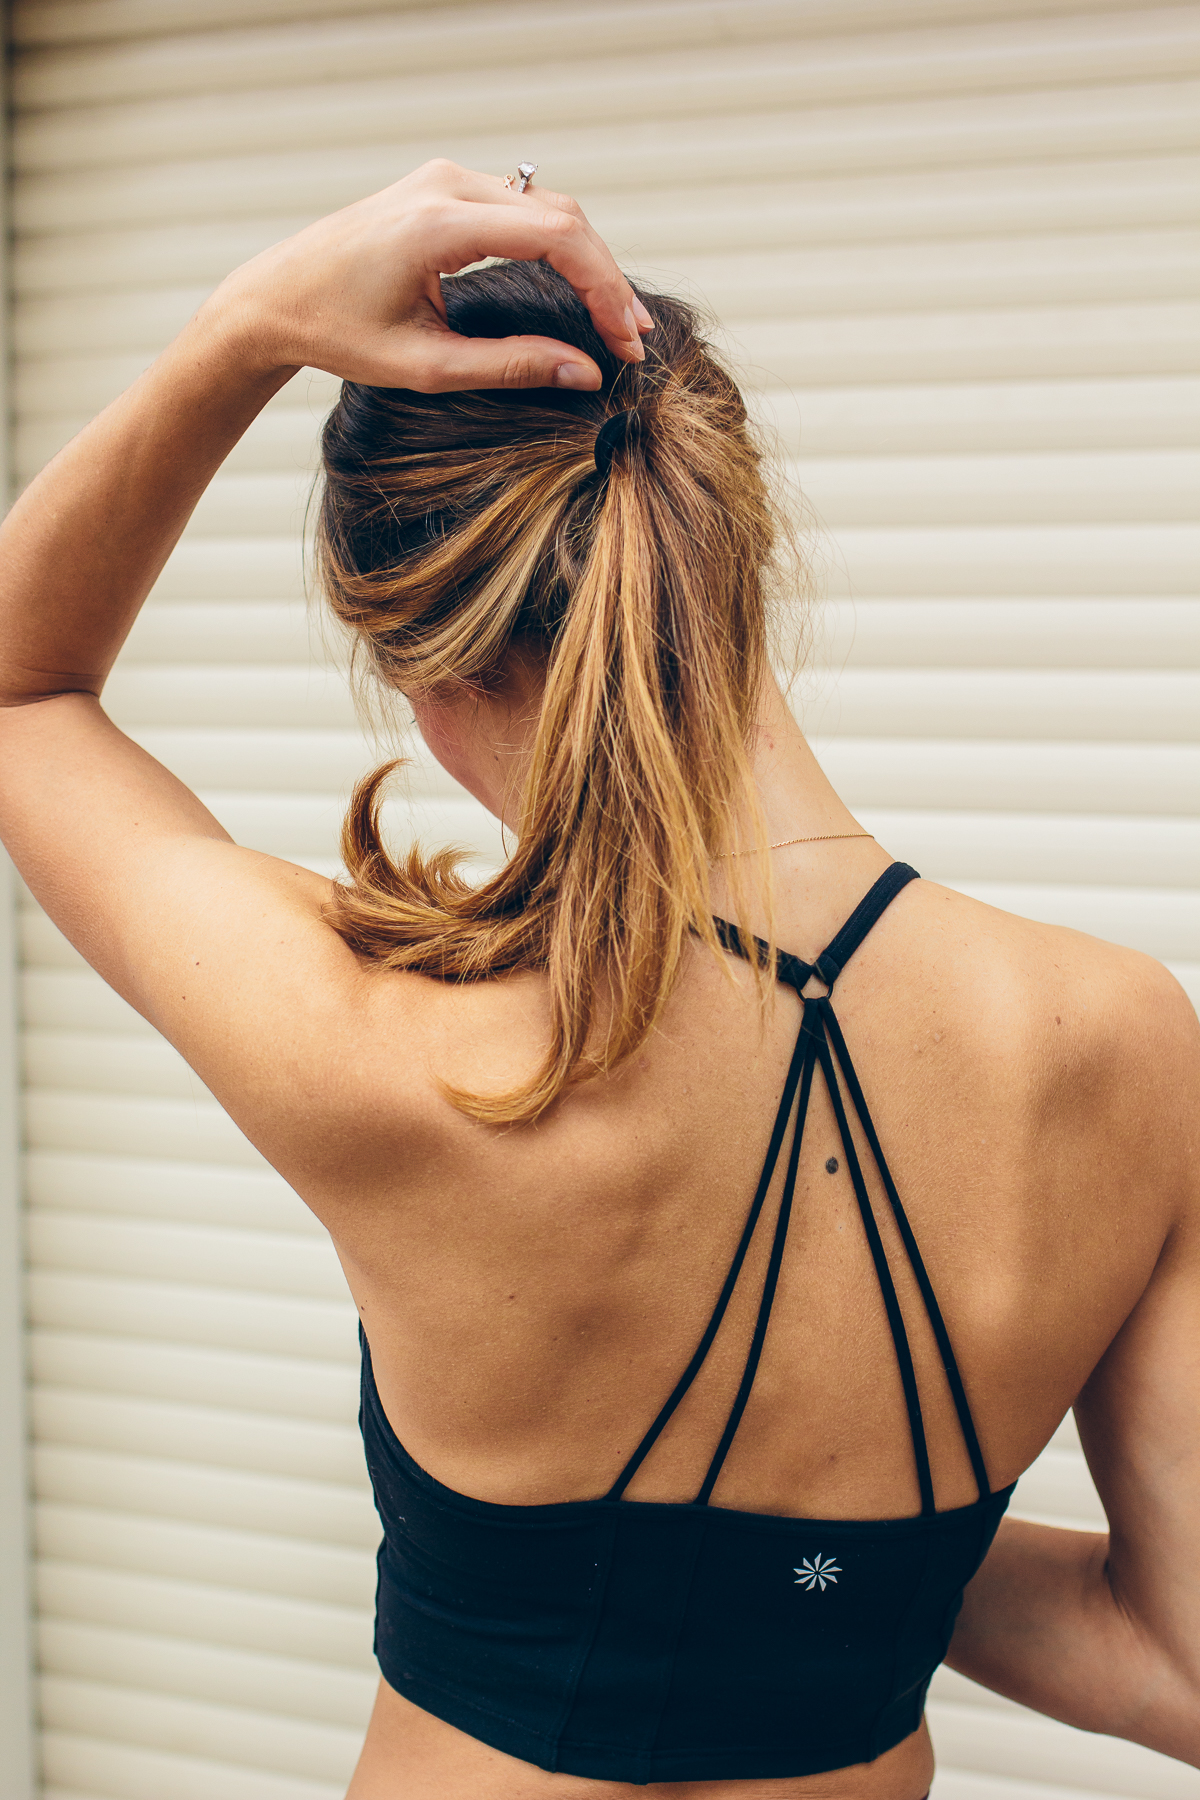 at-home workout, 6 moves for a better butt — via @TheFoxandShe